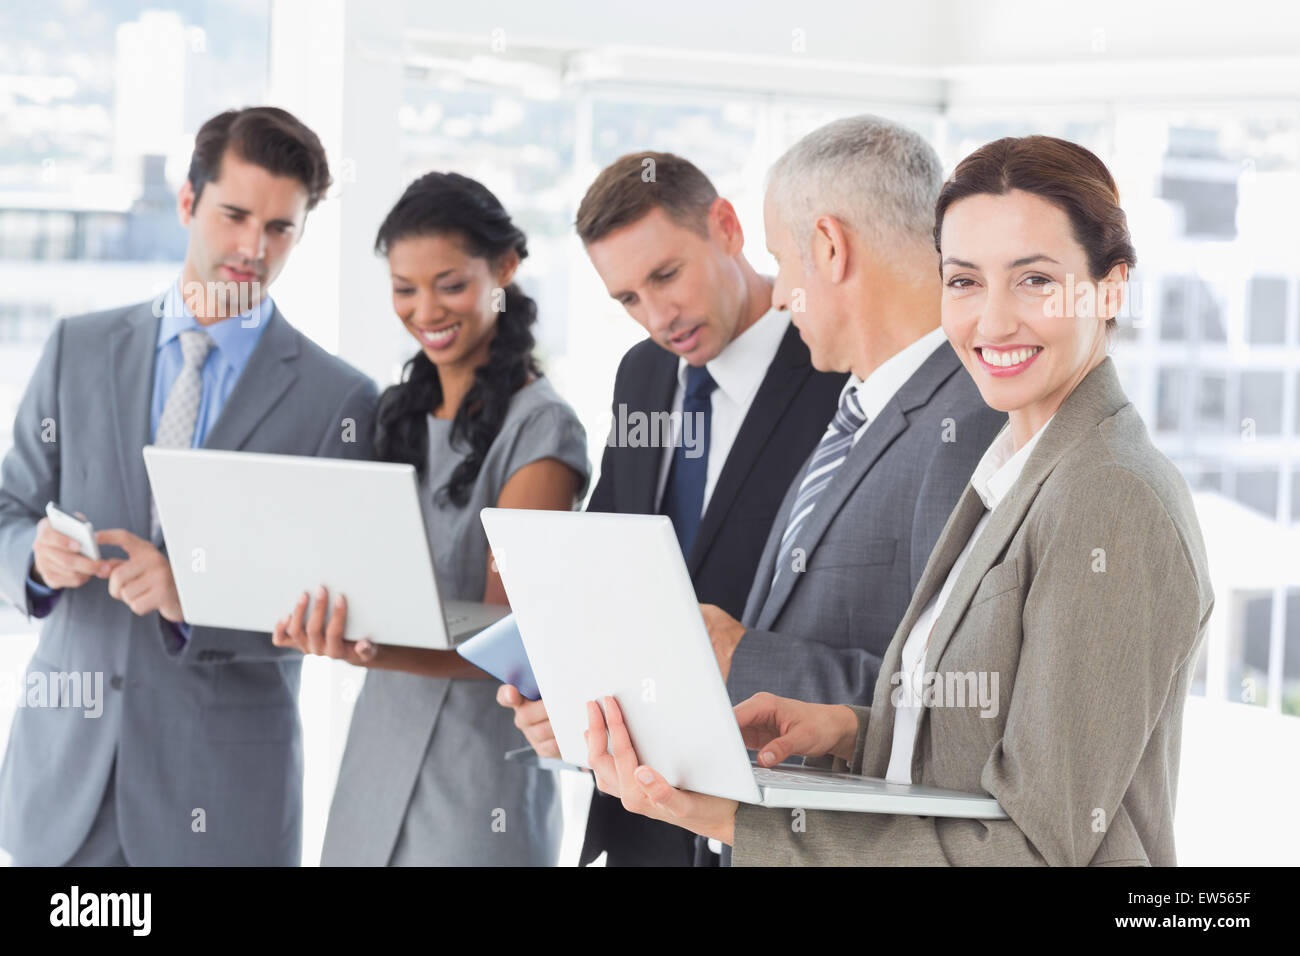 Business colleagues showing their multimedia devices to each other Stock Photo